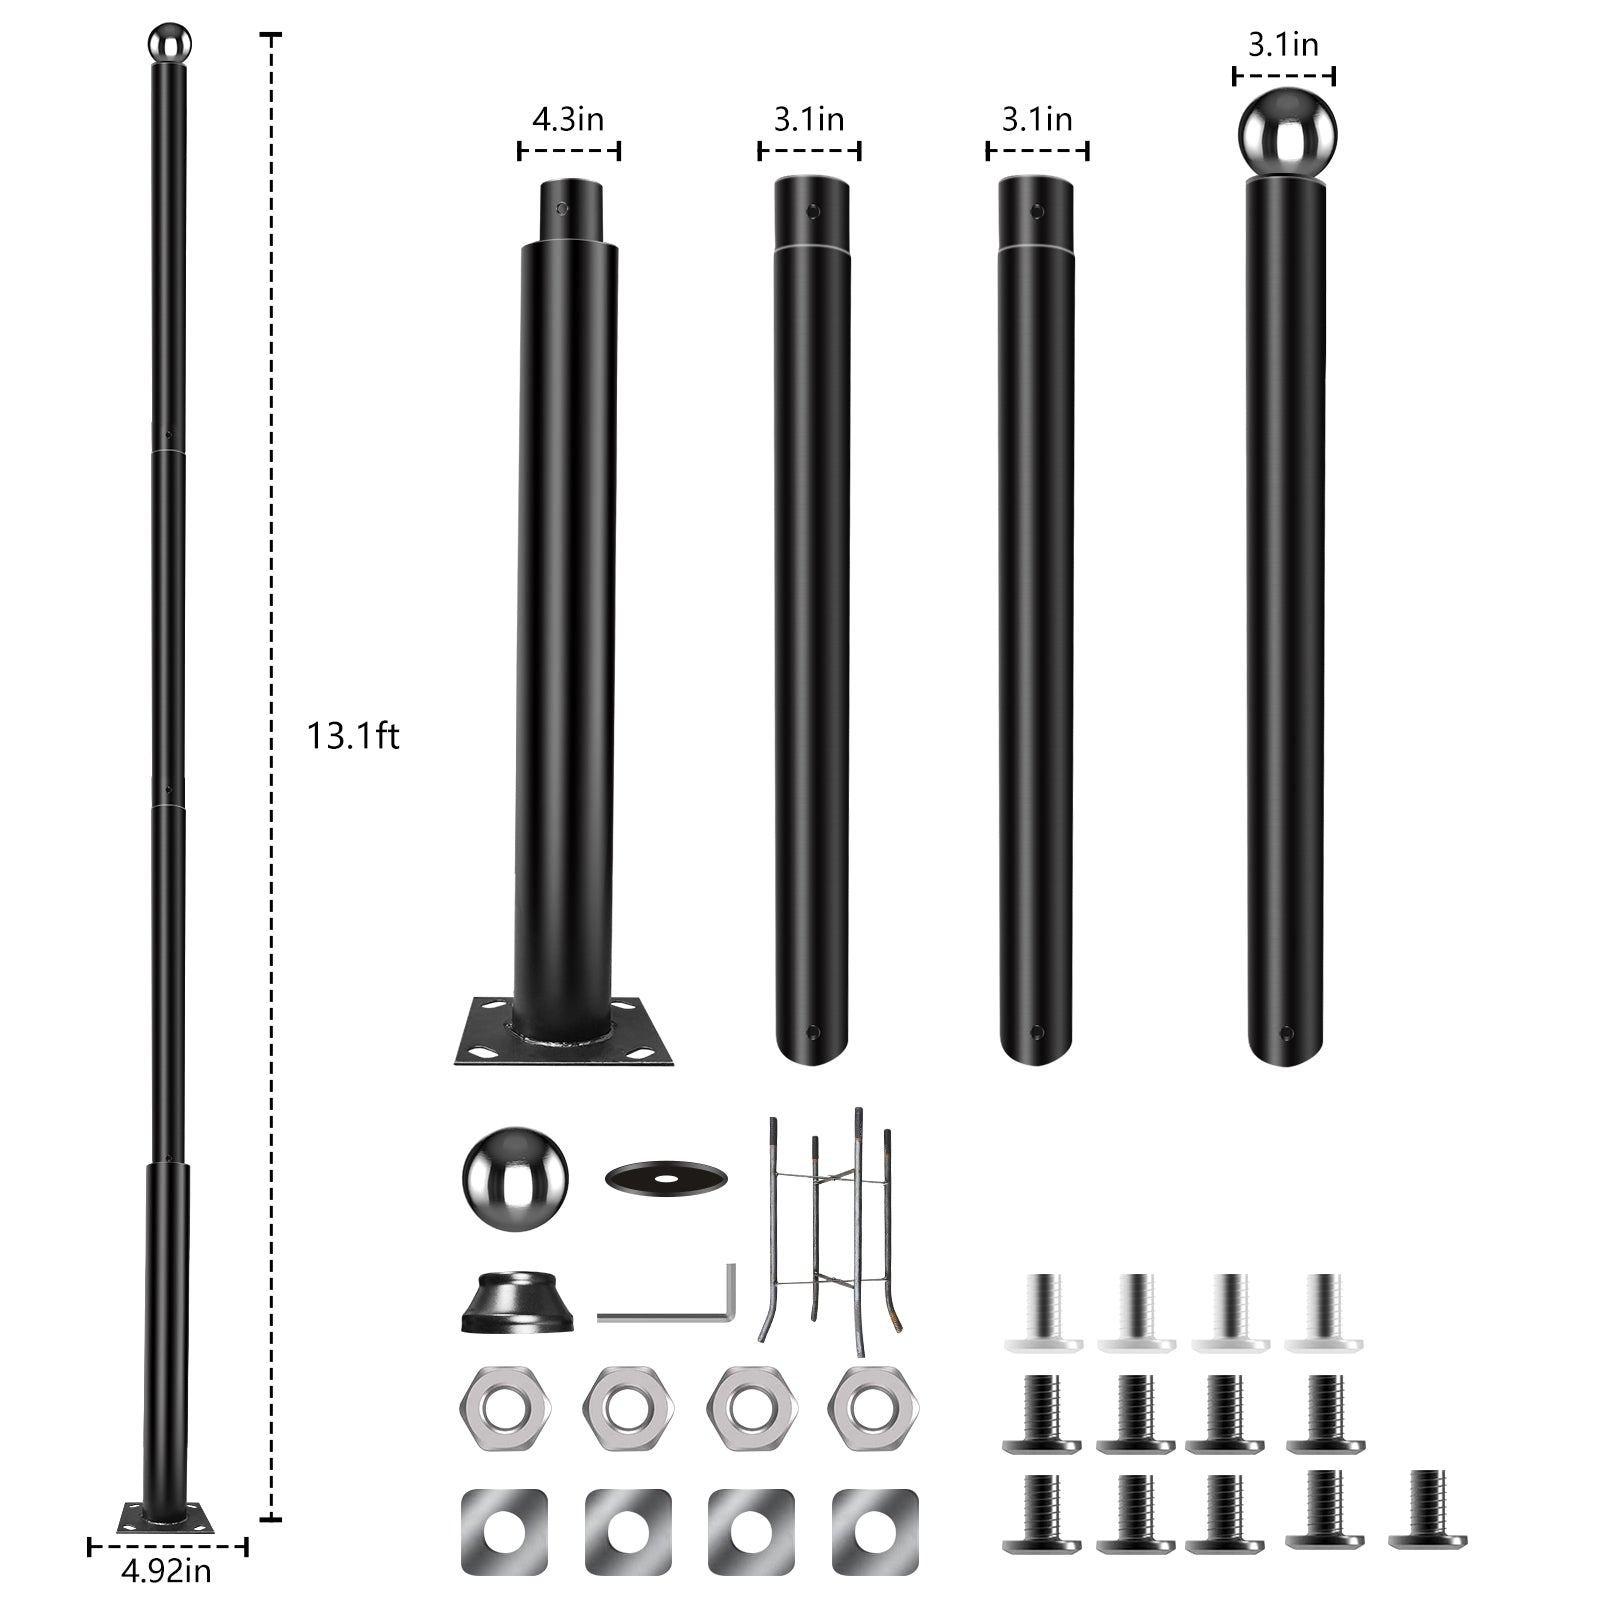 TENKOO Street Light Pole Black 3.1 in. UP to 13.1 FT Tall.  Outdoor Universal Metal Street Light Pole Post with Base Mounting Steel Anchors